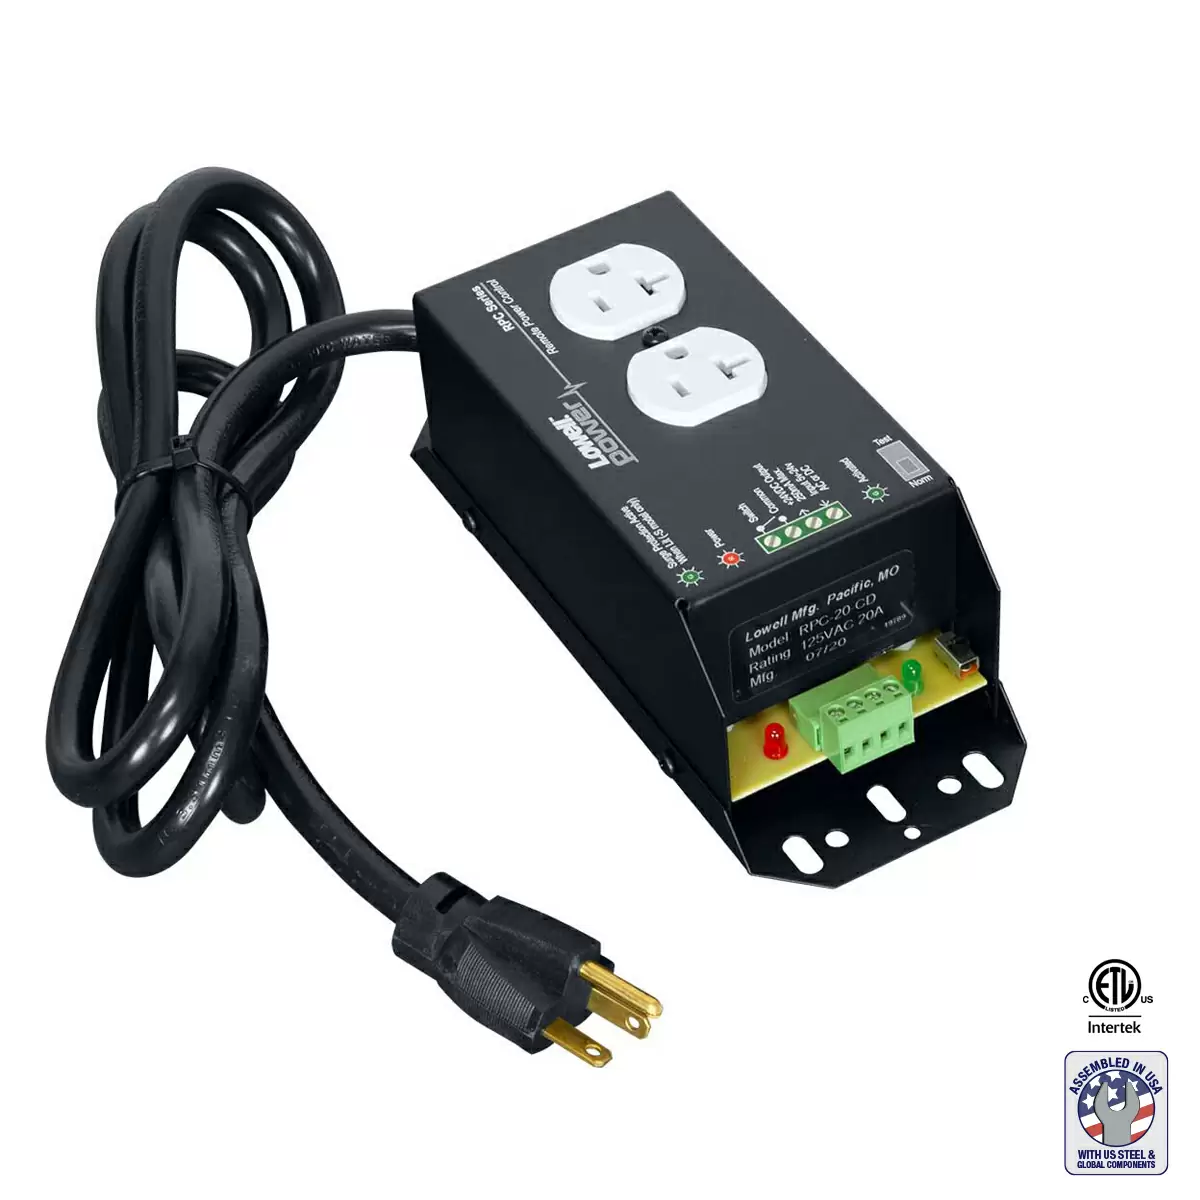 Remote Power Control with 2–20A Outlets | Lowell Manufacturing